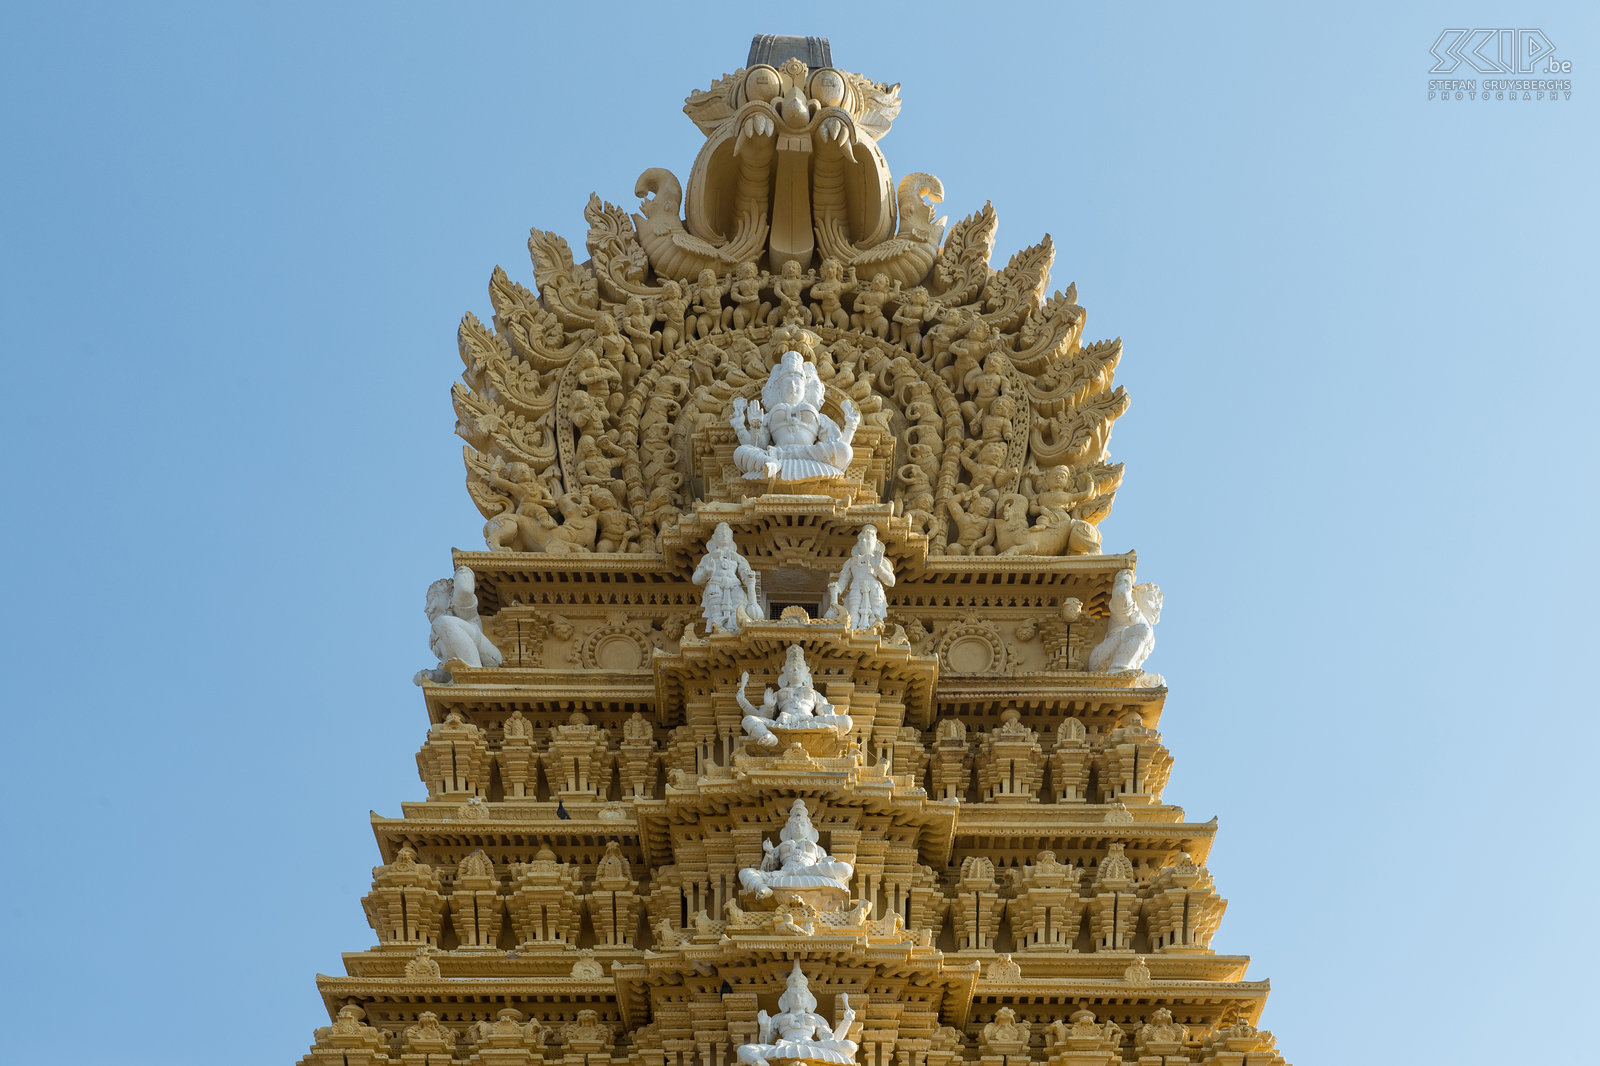 Mysore - Chumanudi hill - Chamundeshwari temple The Chamundi Hills  are located 13 km east of Mysore. The Chamundeshwari Temple is located at the top the main hill. The first temple has been build in the 2th century but the enormous tower was constructed in 1827. Stefan Cruysberghs